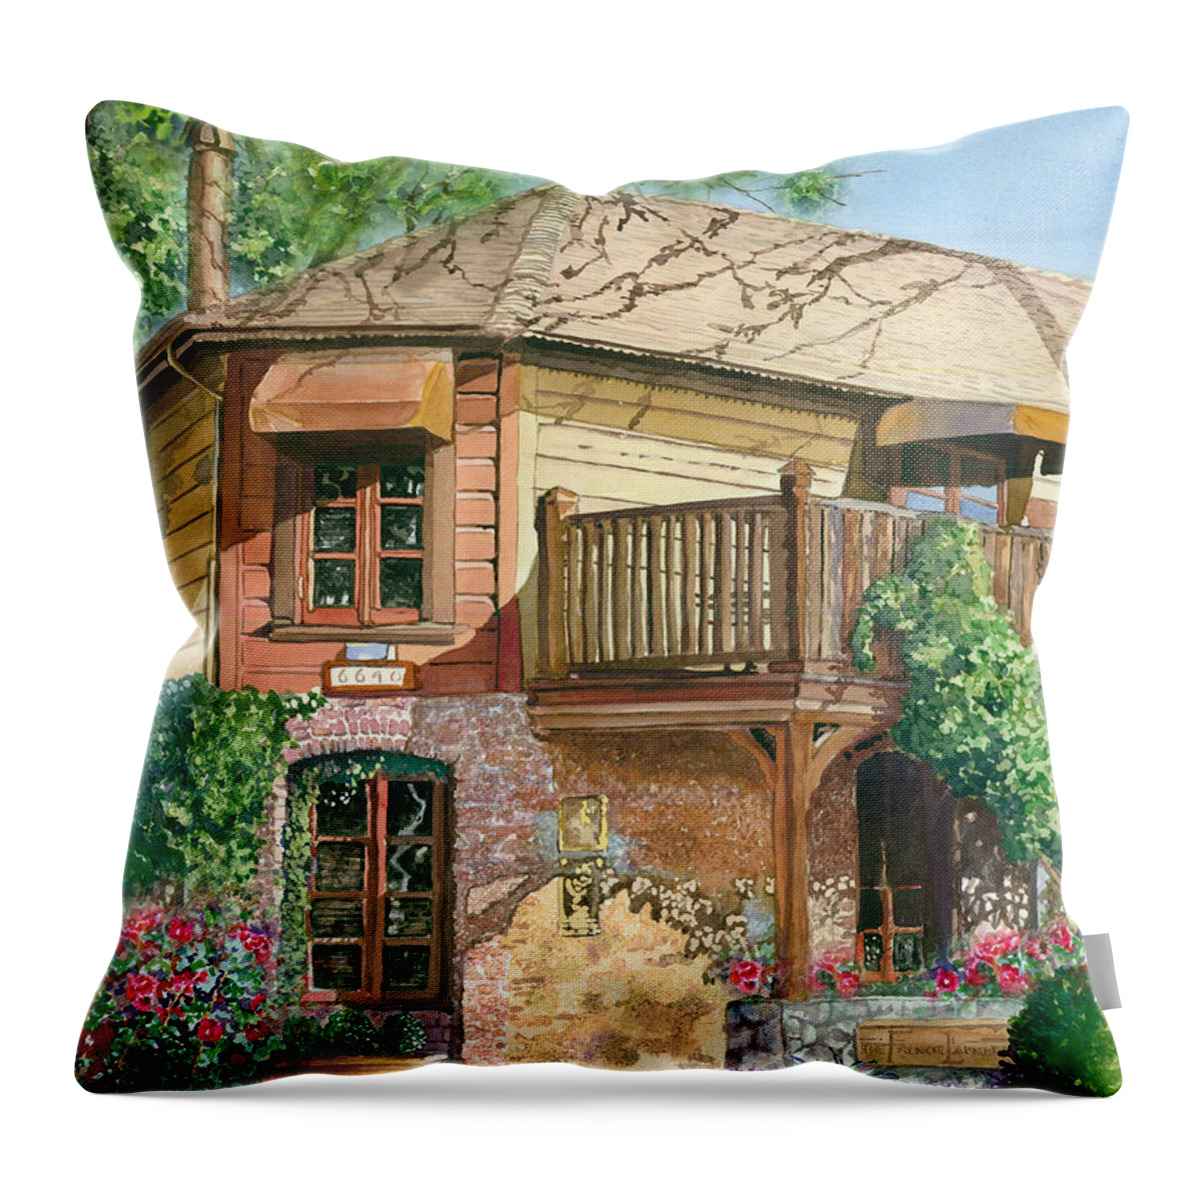 Cityscape Throw Pillow featuring the painting French Laundry Restaurant by Gail Chandler